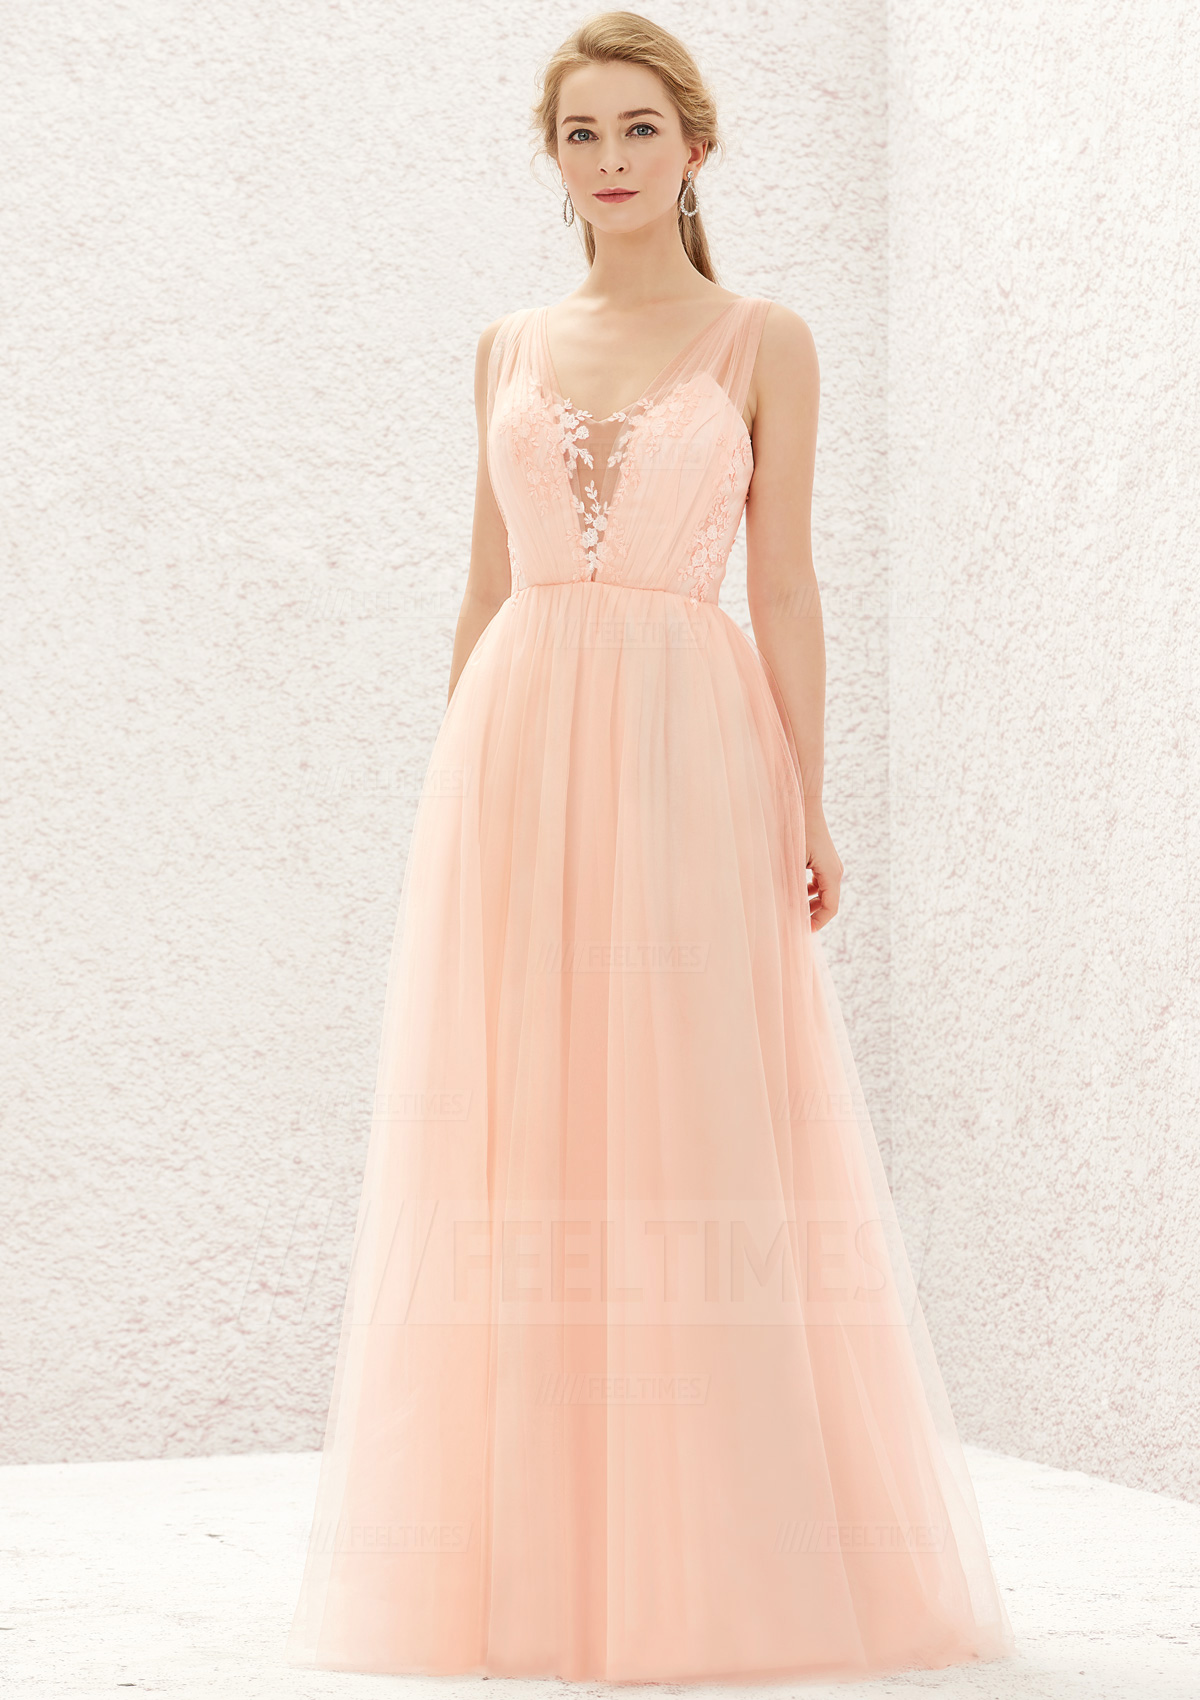 A-line/Princess Sleeveless Long/Floor-Length Tulle/Satin Bridesmaid Dress With Pleated Lace
